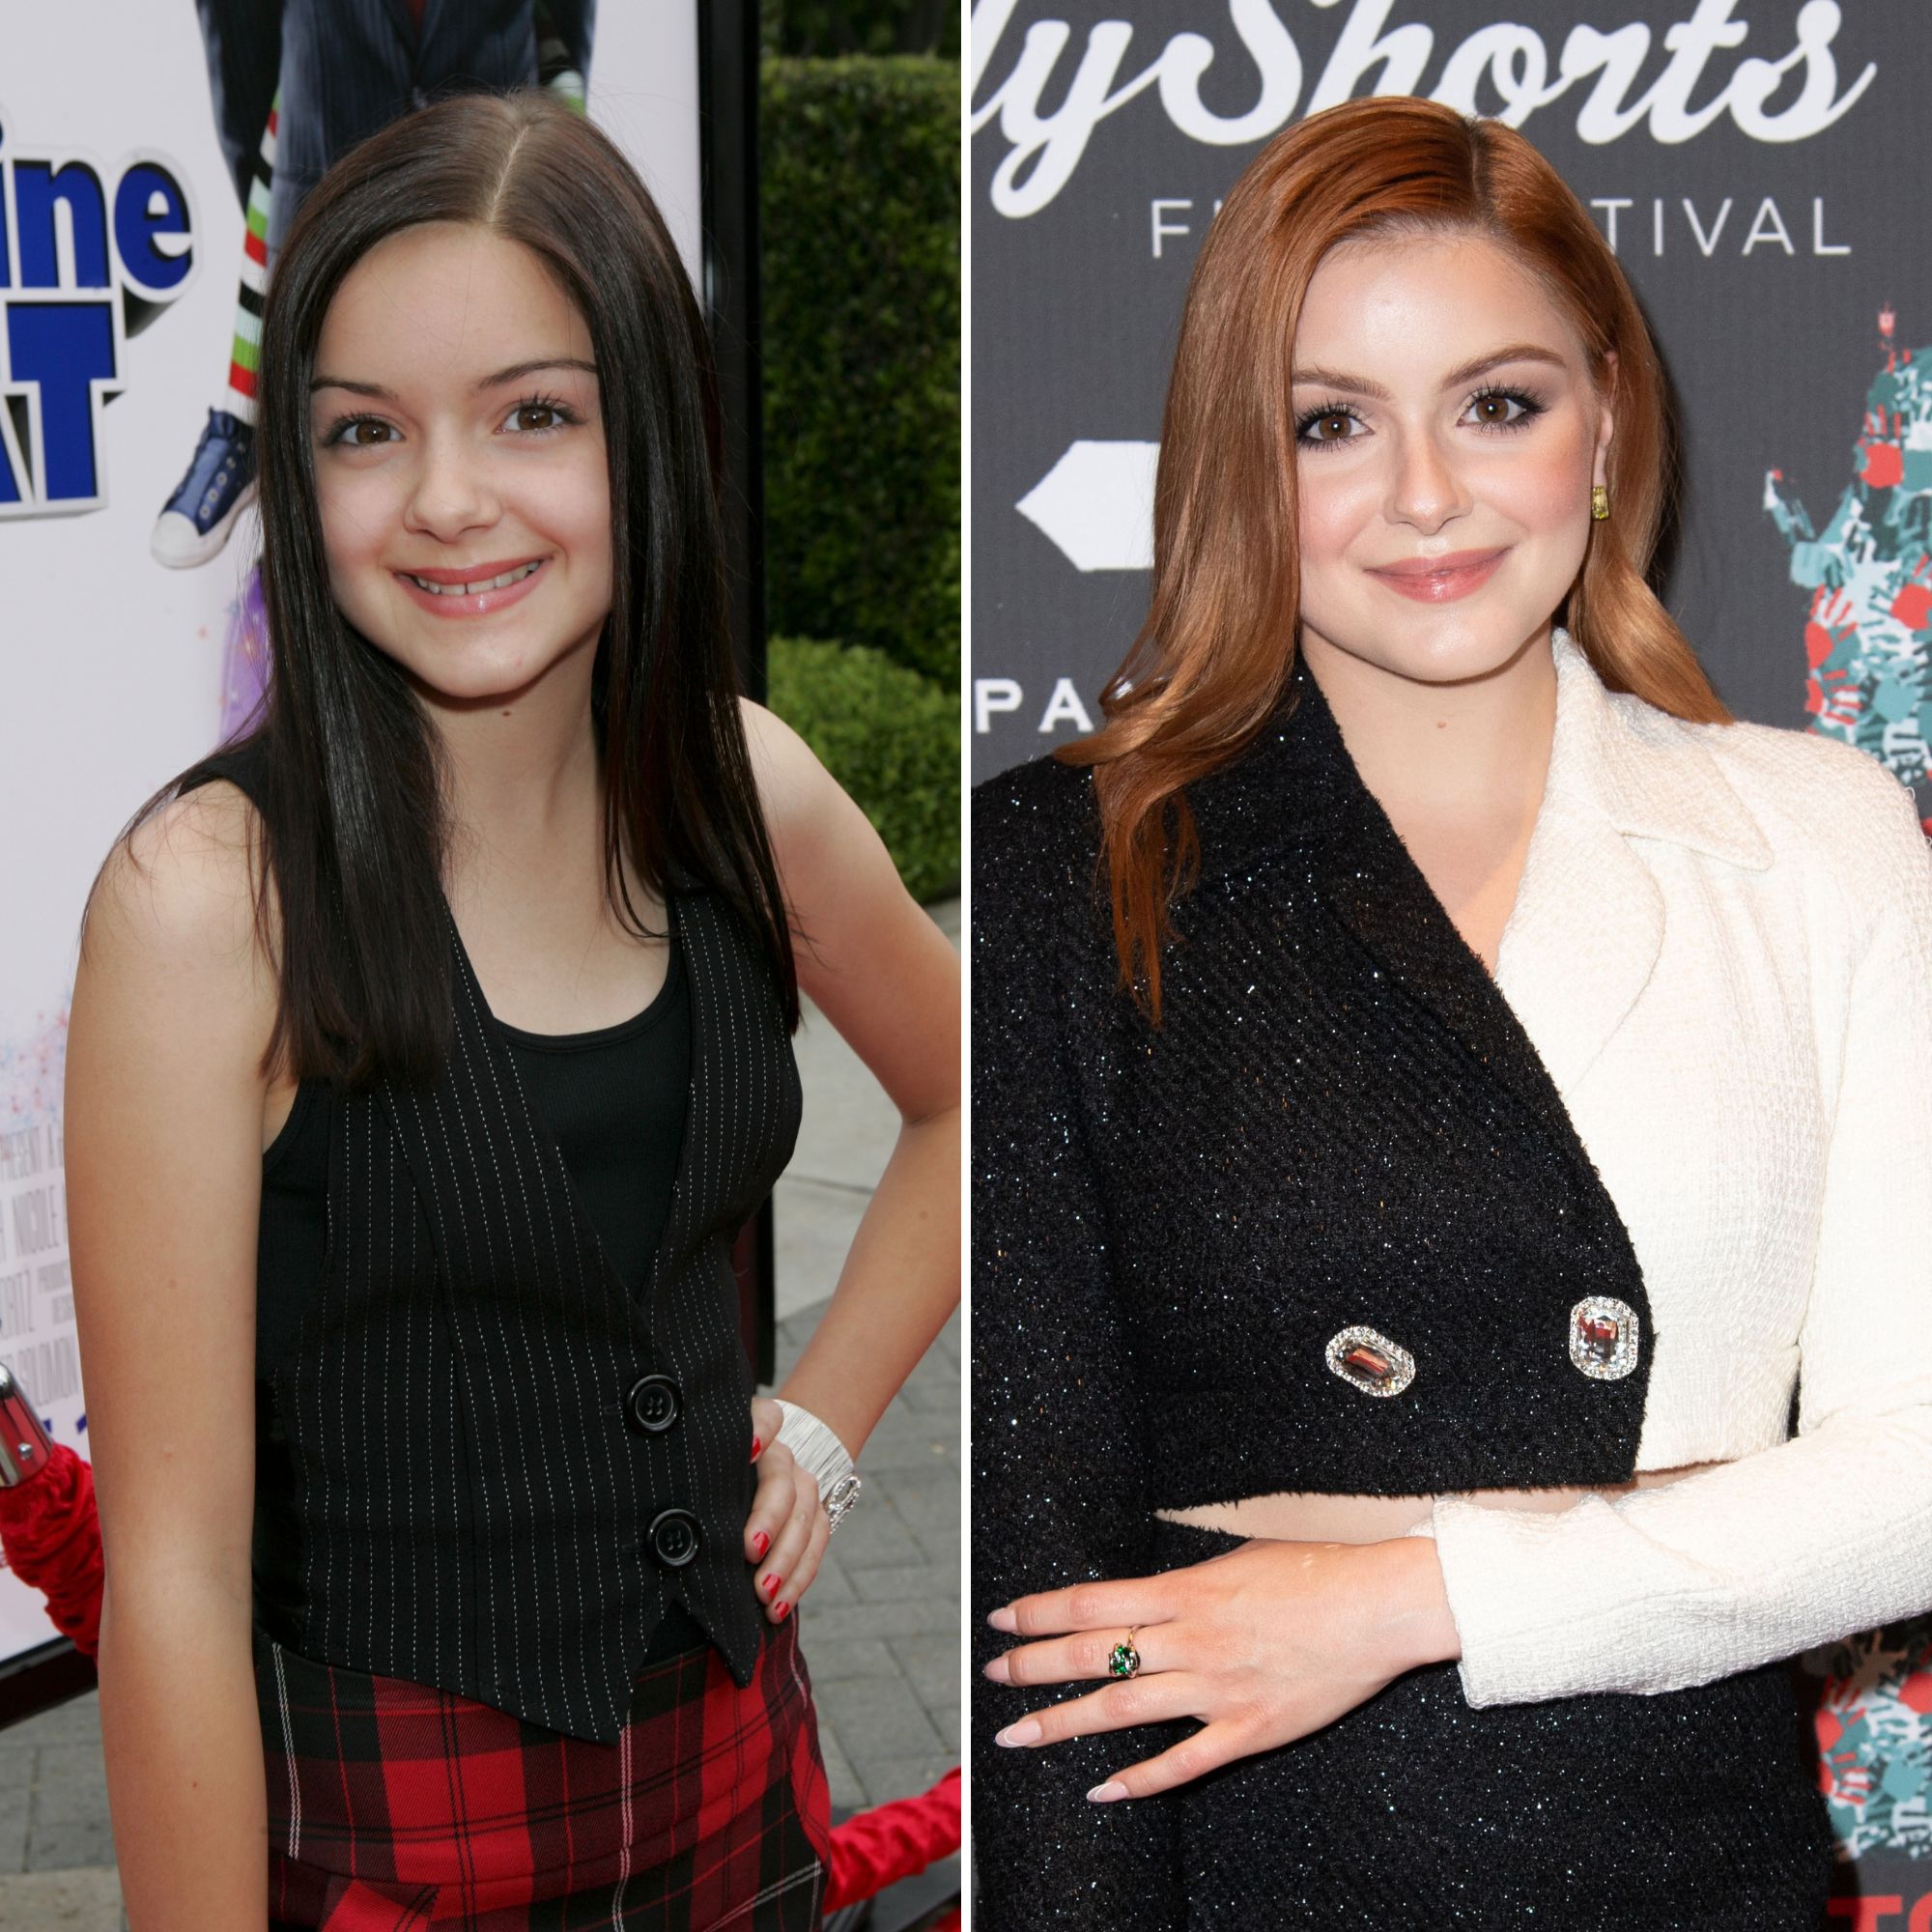 Ariel Winter Porn 2015 - Ariel Winter's Transformation Over the Years: See Pics!